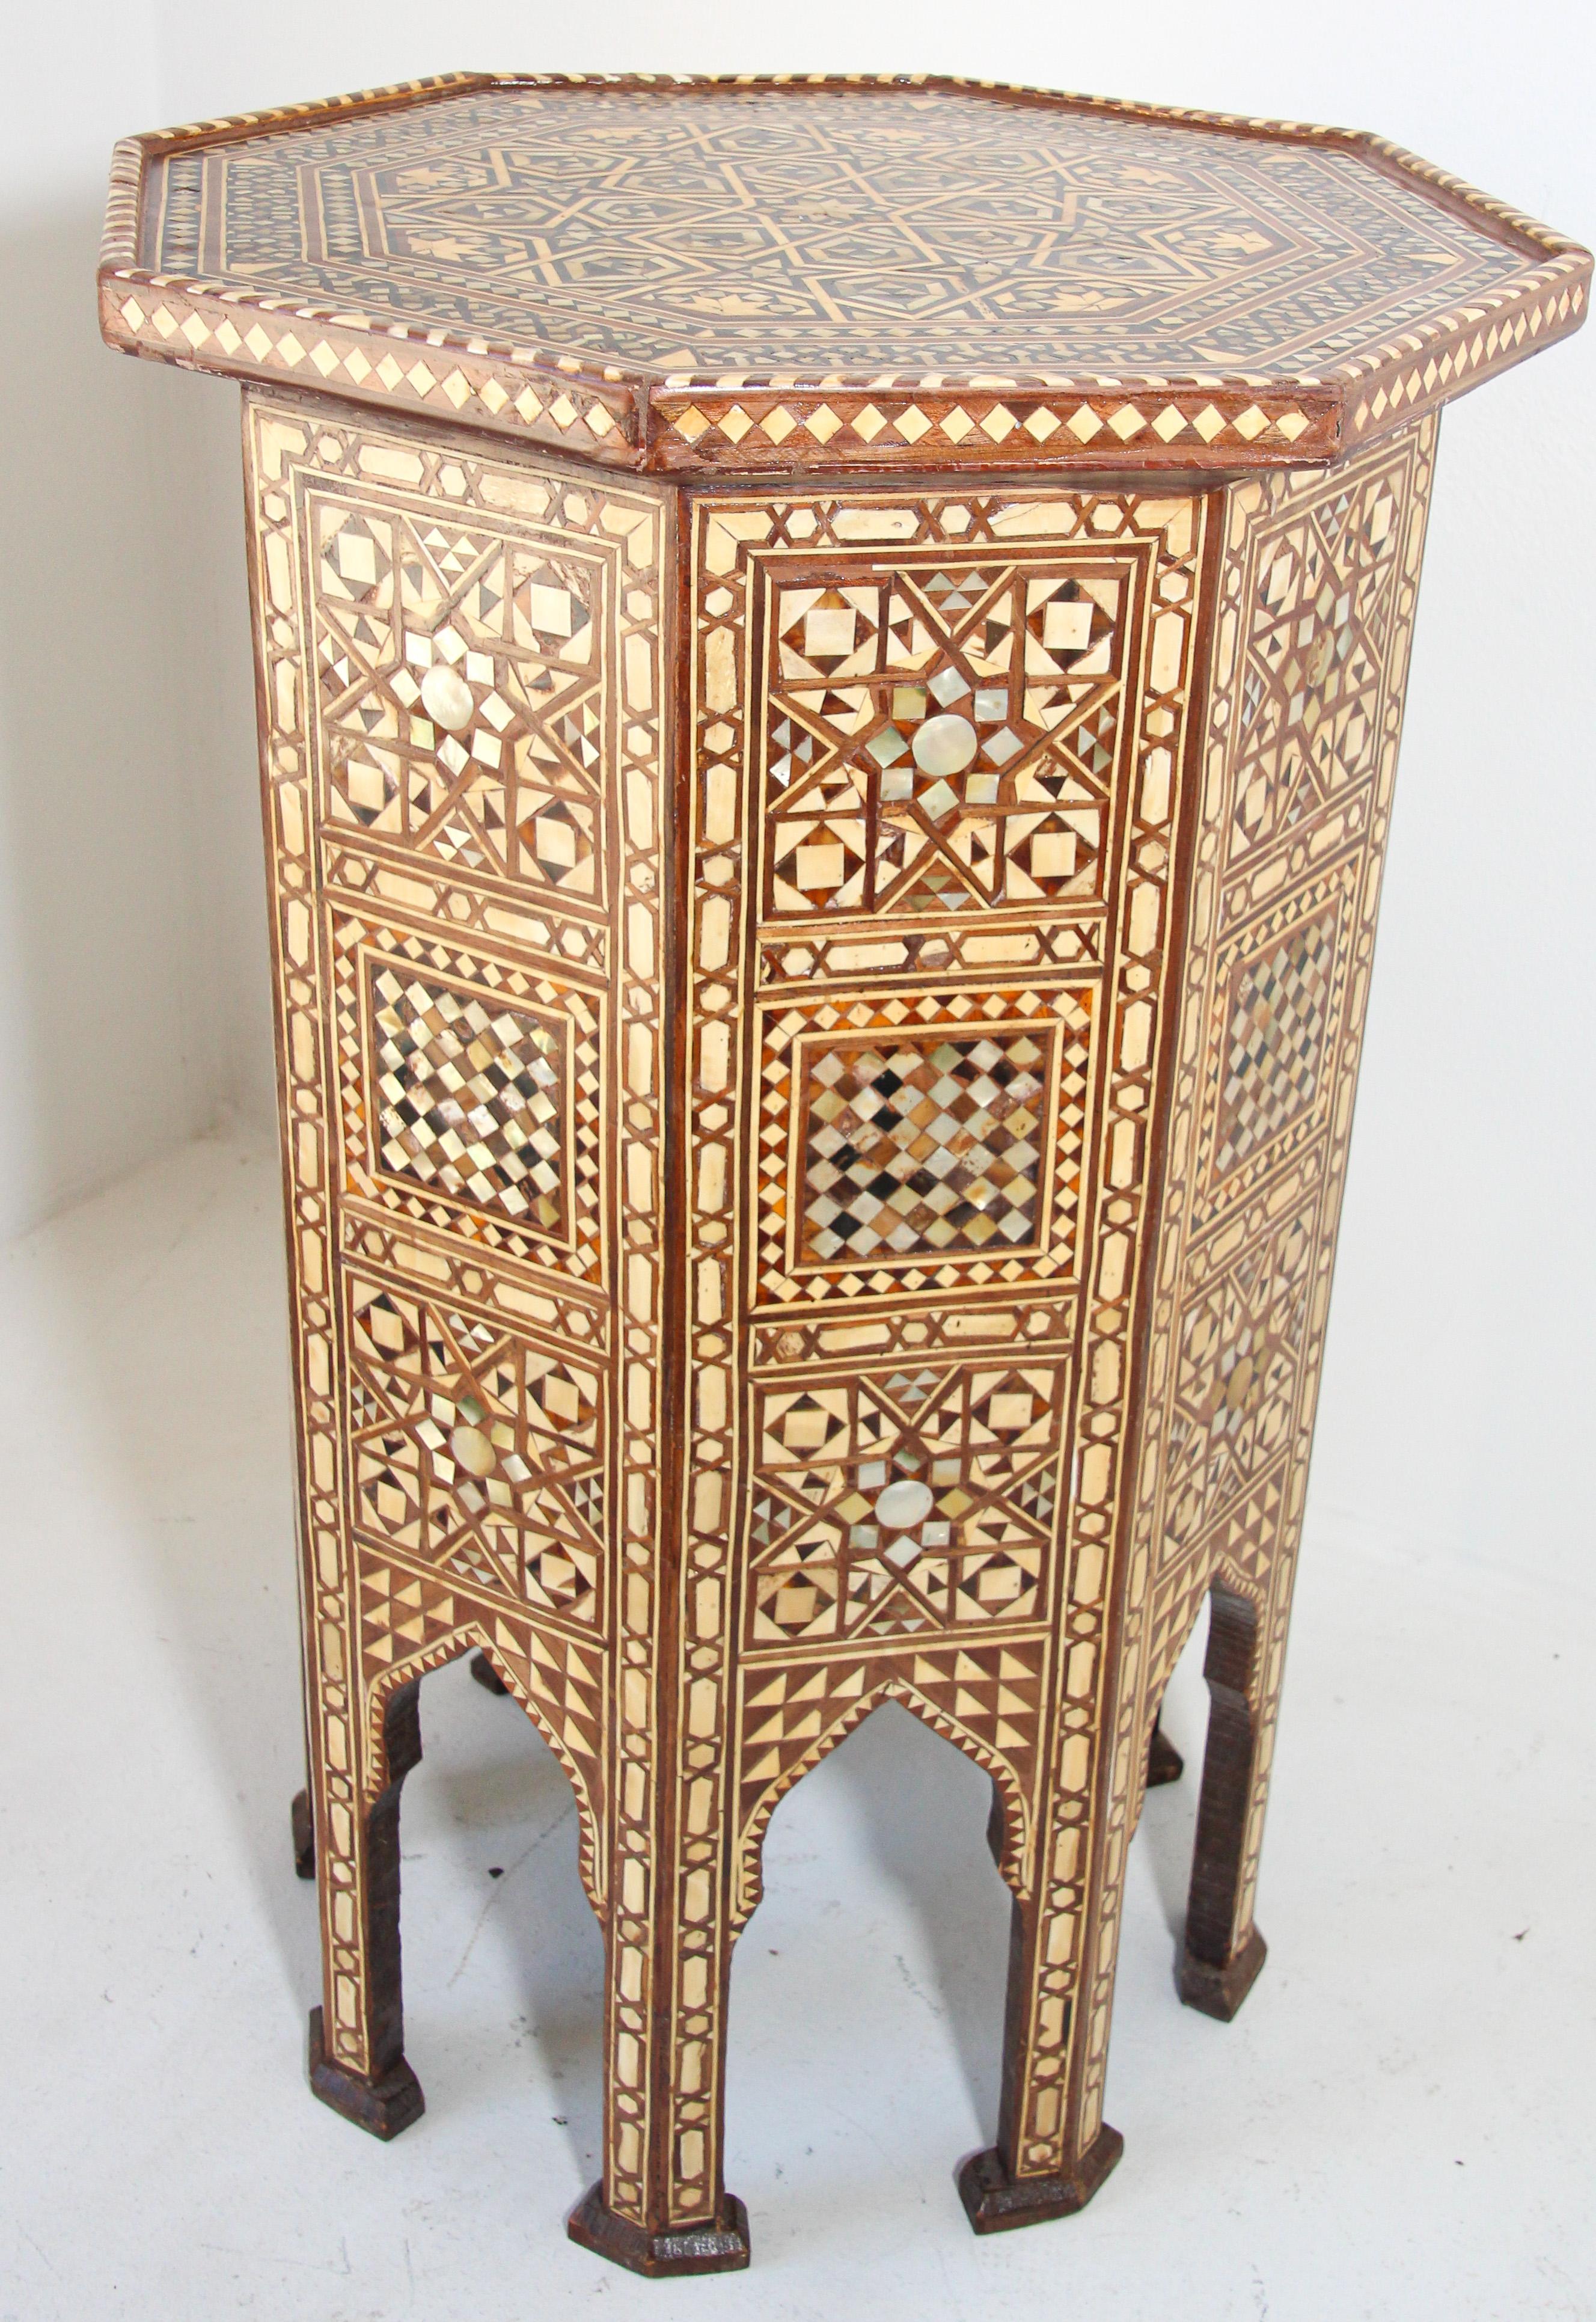 Moroccan Moorish style walnut octagonal pedestal table inlaid with mosaic marquetry.
The tabletop is of octagonal form, decorated with various geometric and arabesque designs.
The table is standing on eight legs separated by cusped and engraved